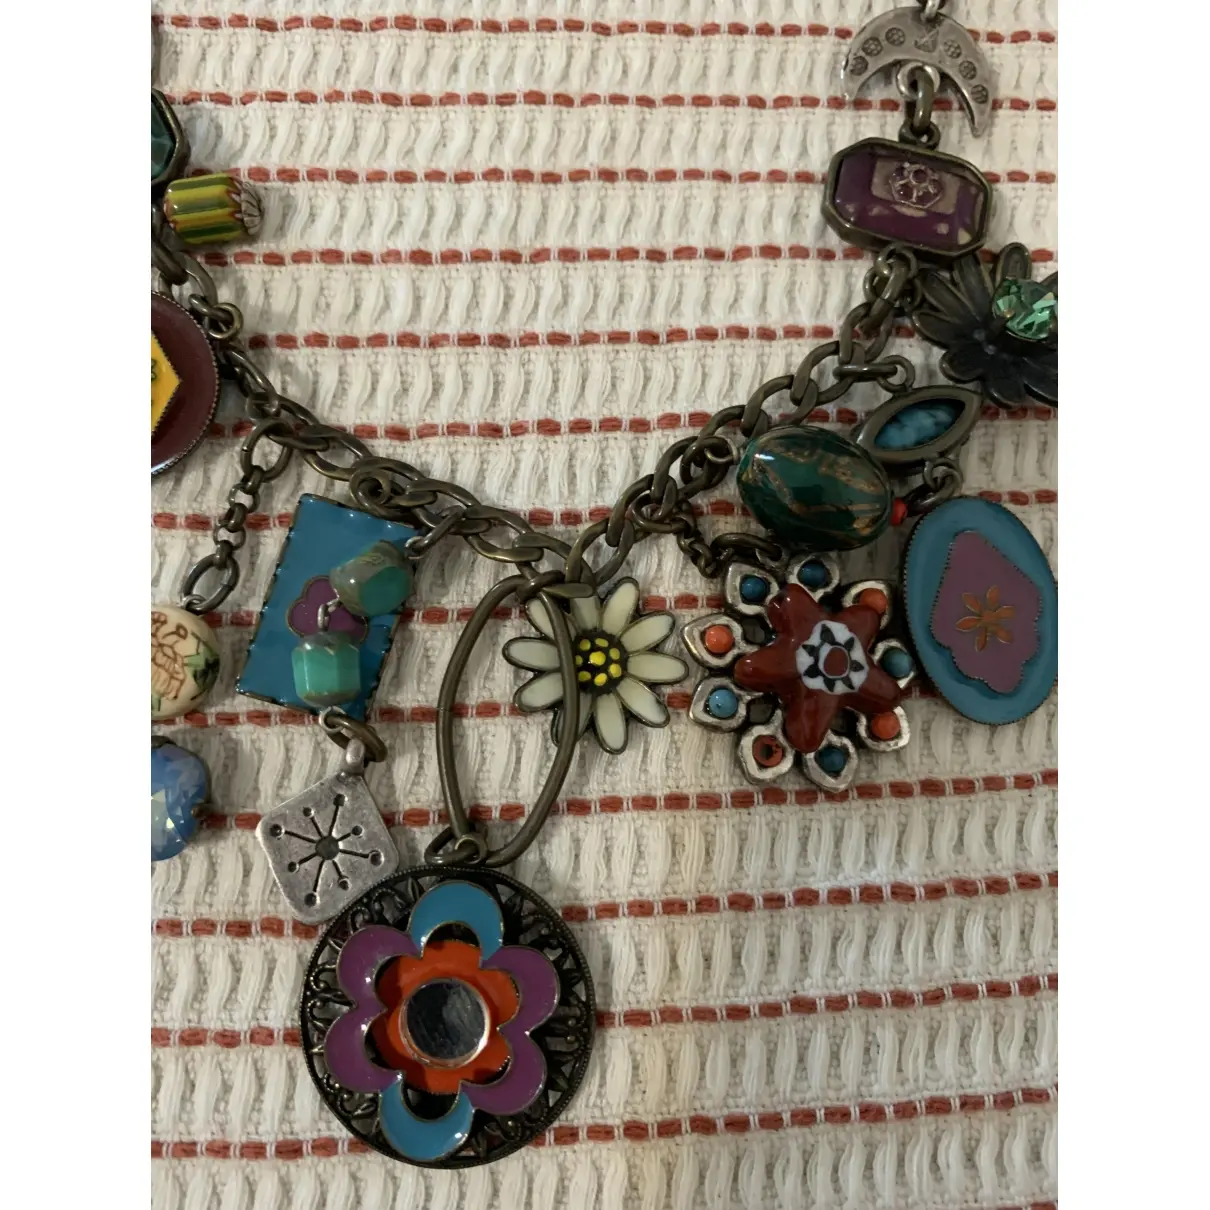 Reminiscence Ceramic necklace for sale